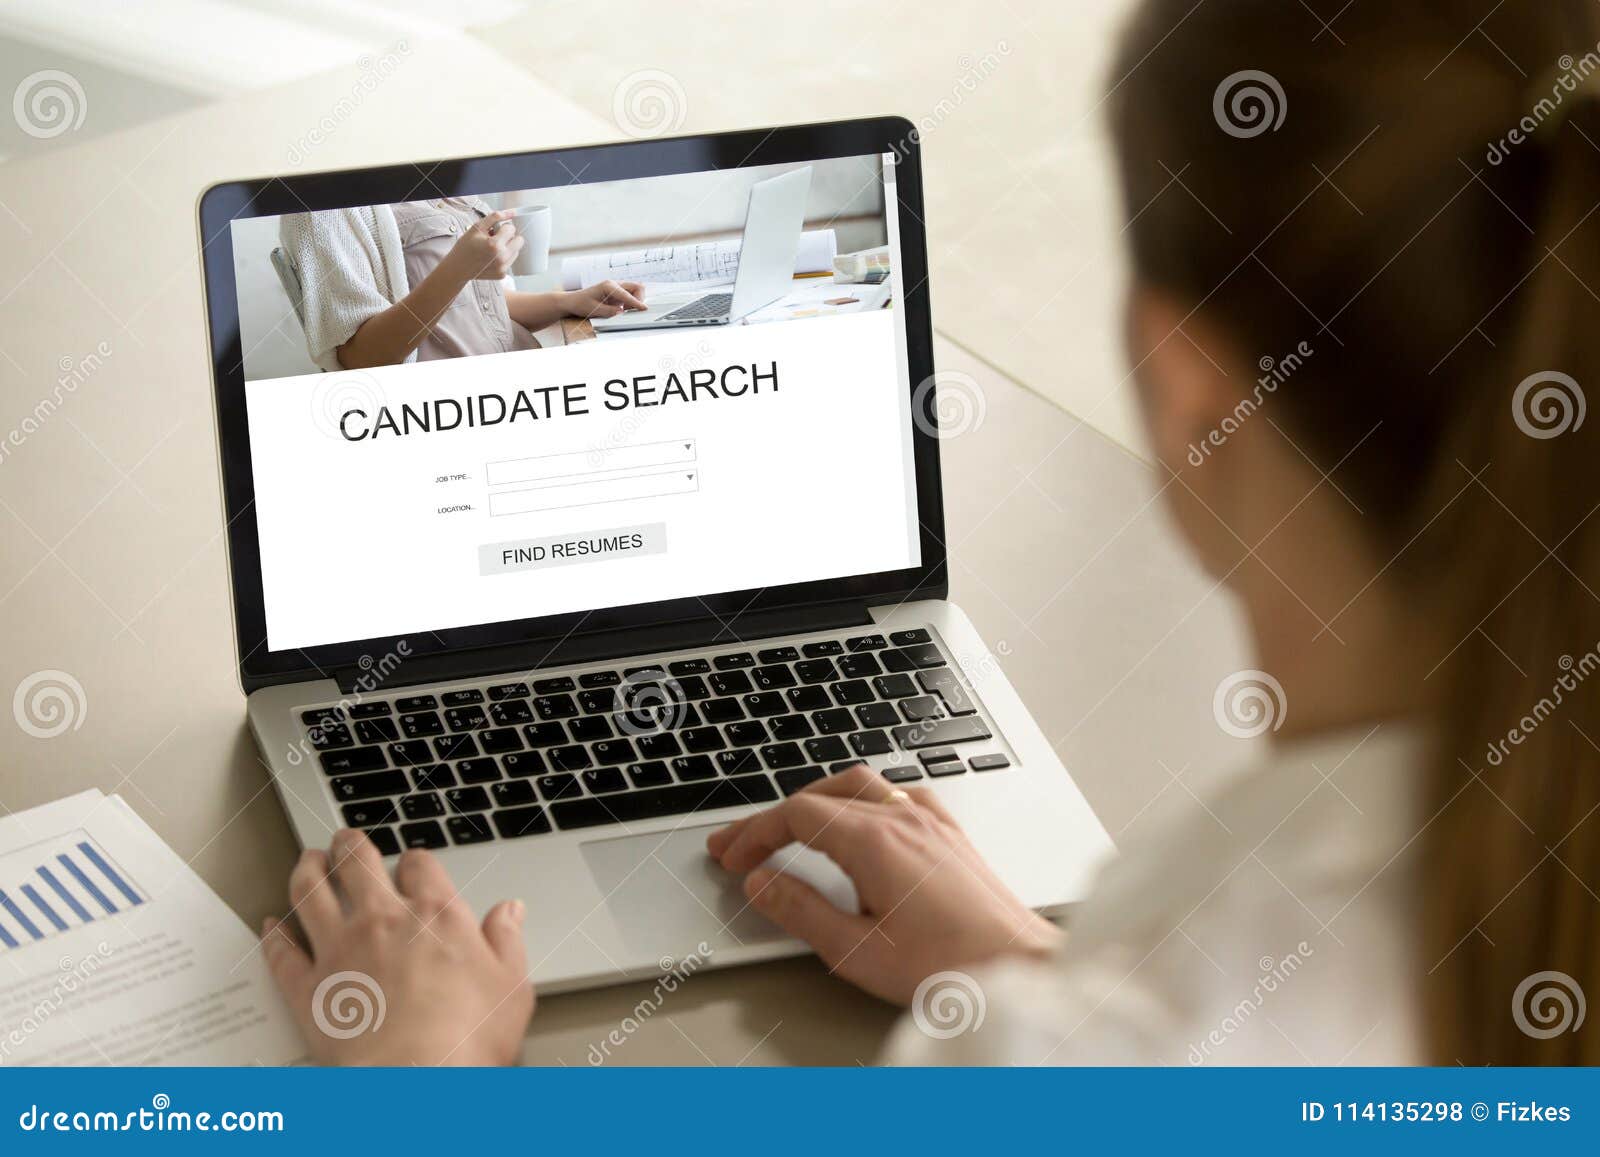 young businesswoman searching for job candidate on laptop.